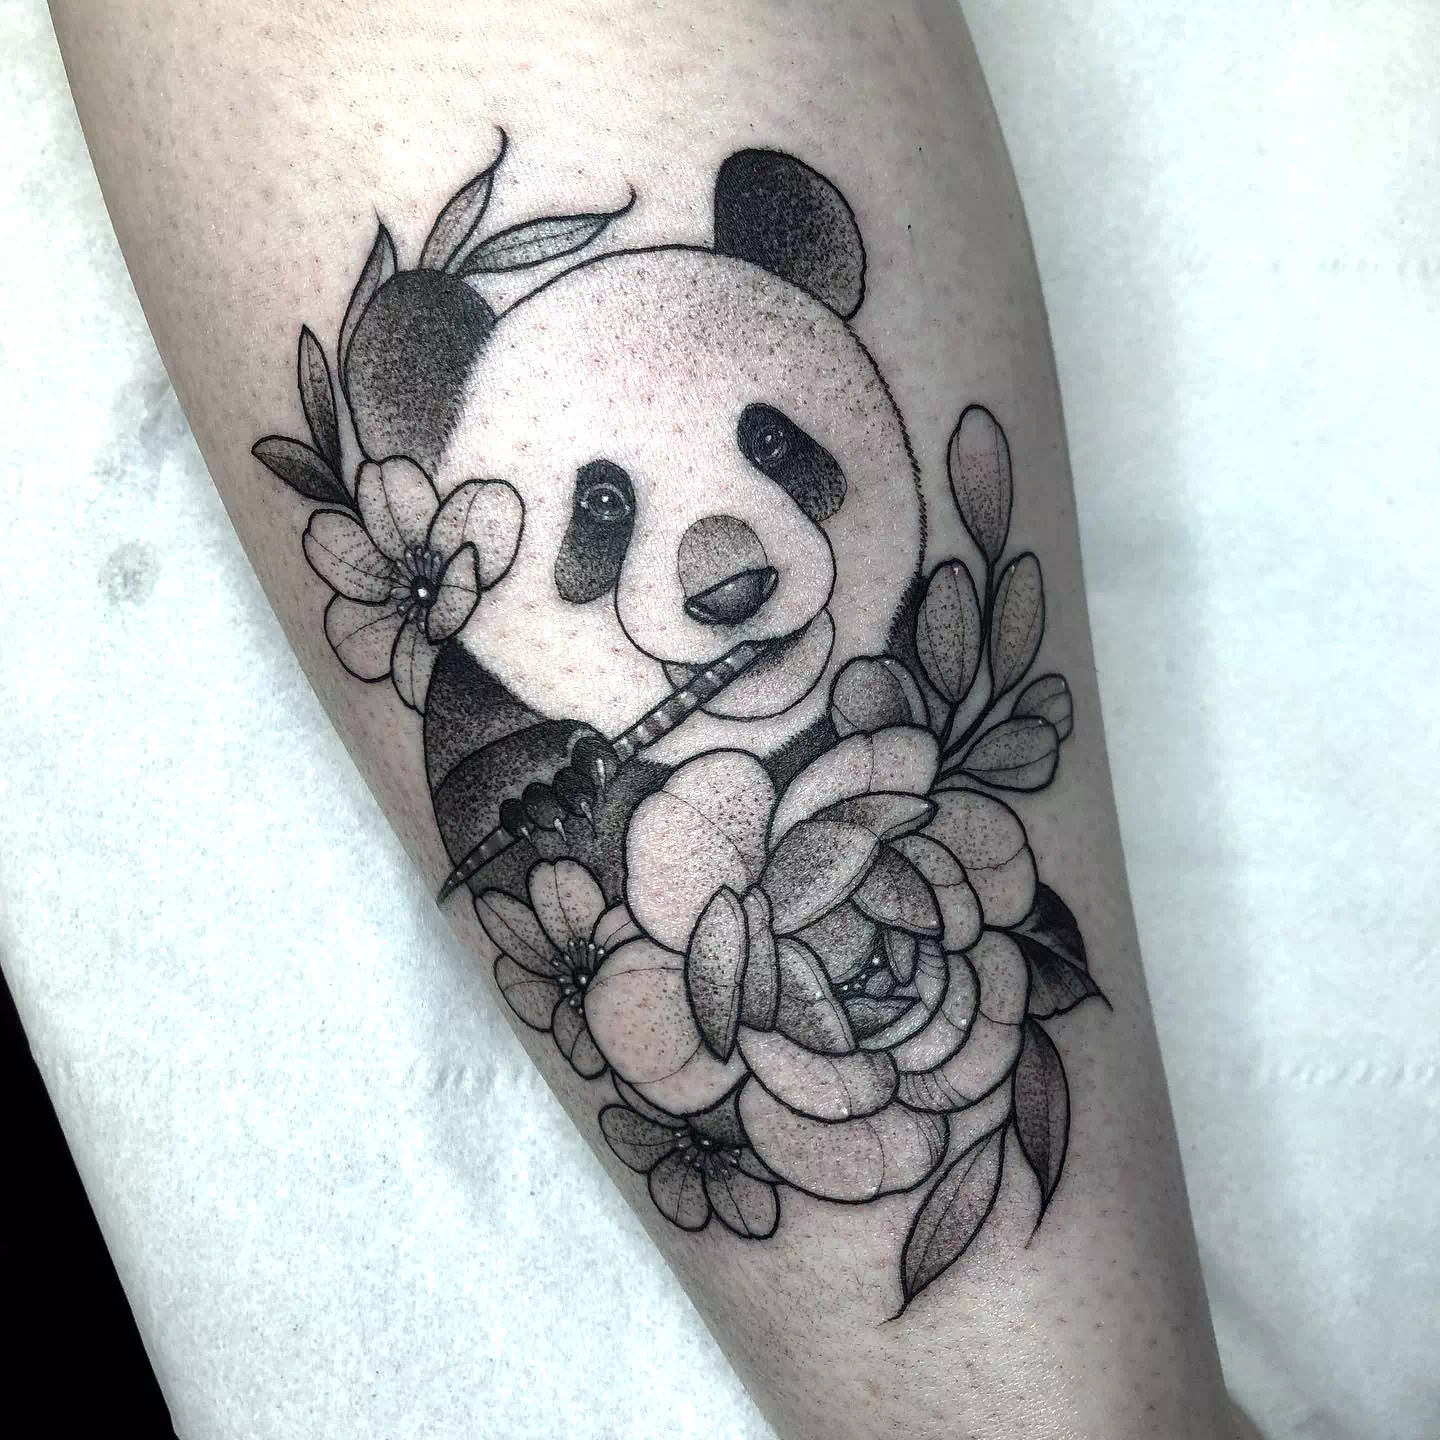 Panda Baby Tattoo On Chest With Flowers